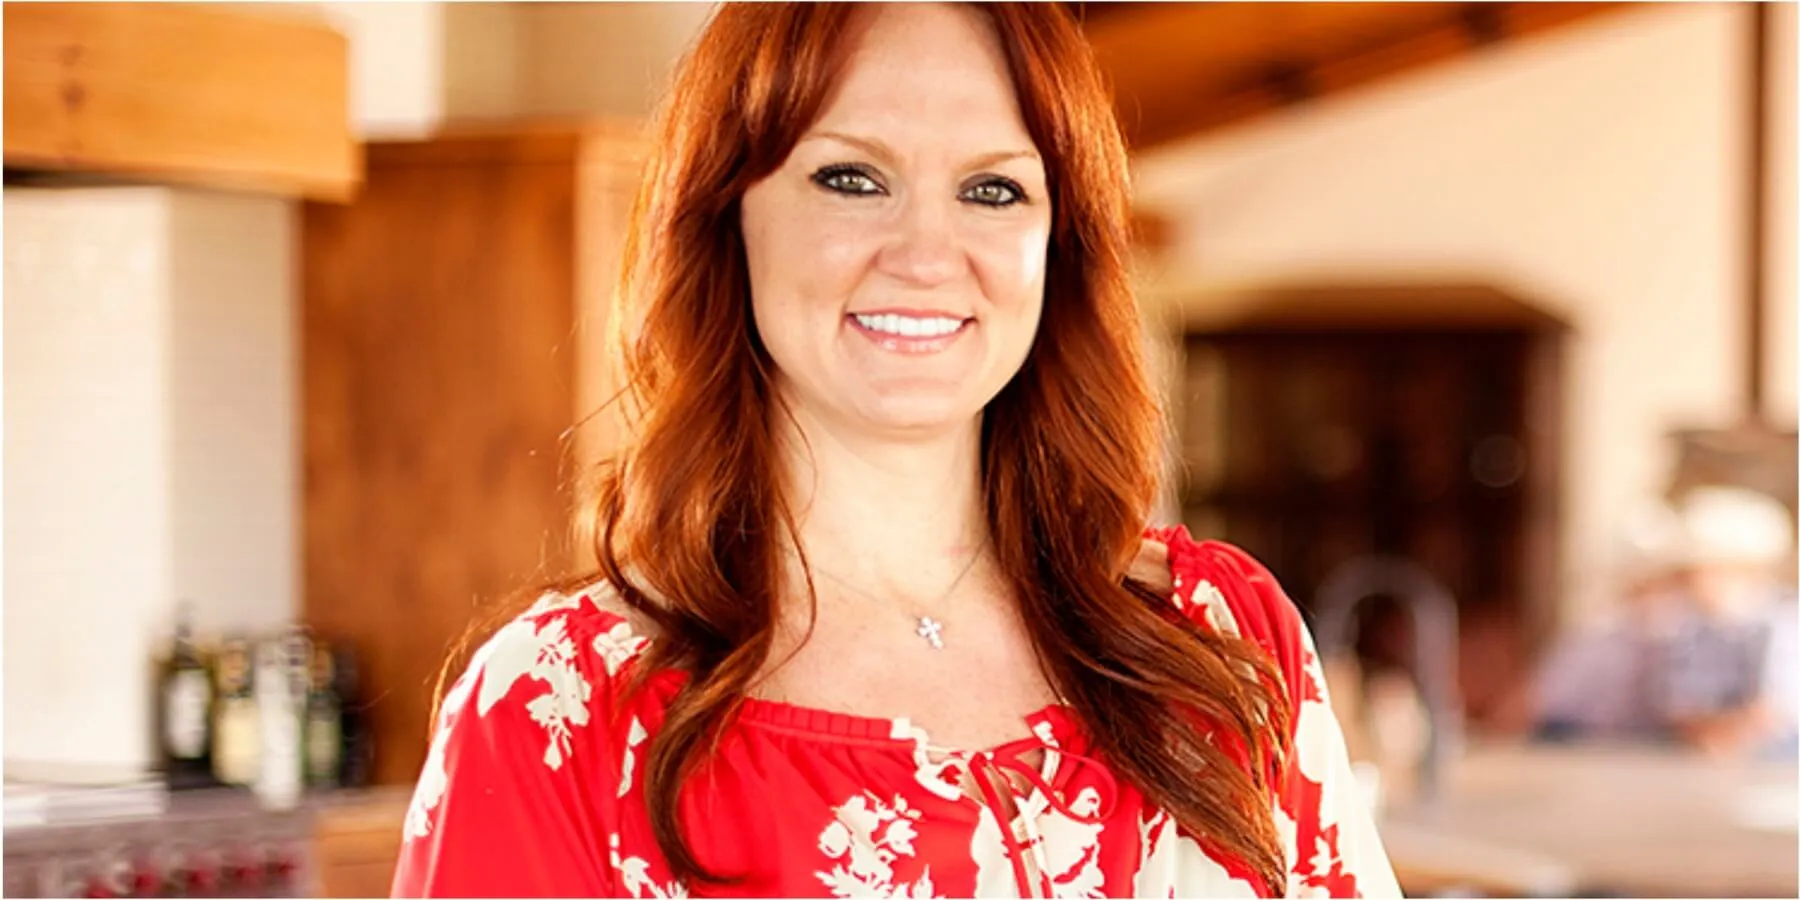 'The Pioneer Woman' star Ree Drummond photographed on her ranch in Pawhuska, Oklahoma